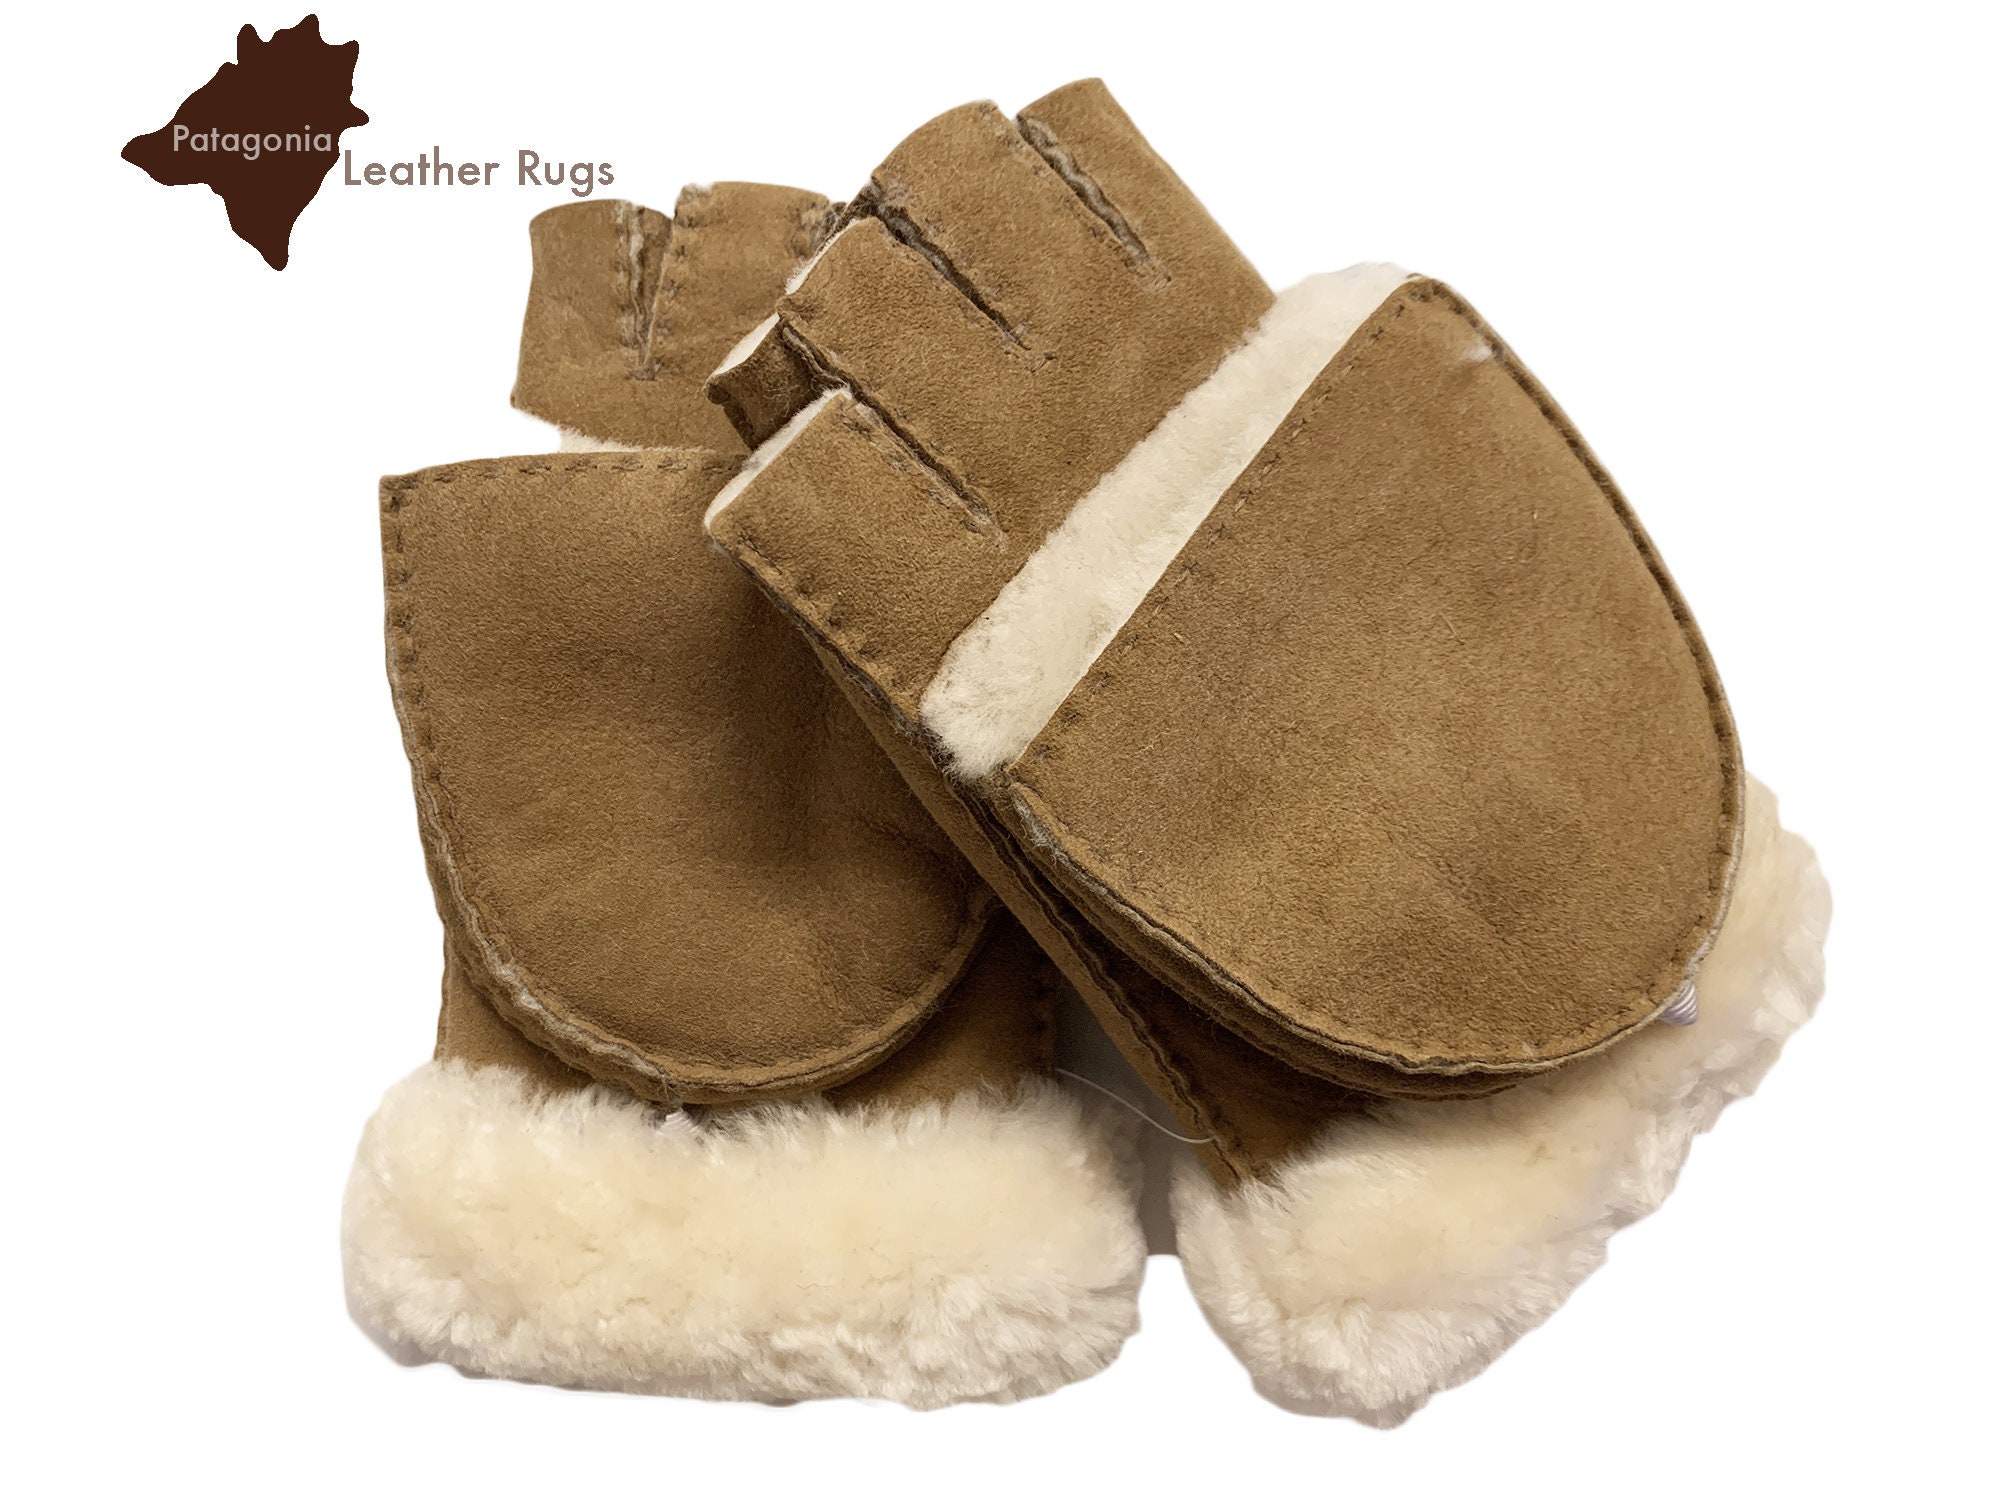 Classic Smooth Leather Mittens Touch Screen Glove Letter Sheepskin Mitten  Women Warm Winter Gloves With Box From Bapefashiongift, $49.57